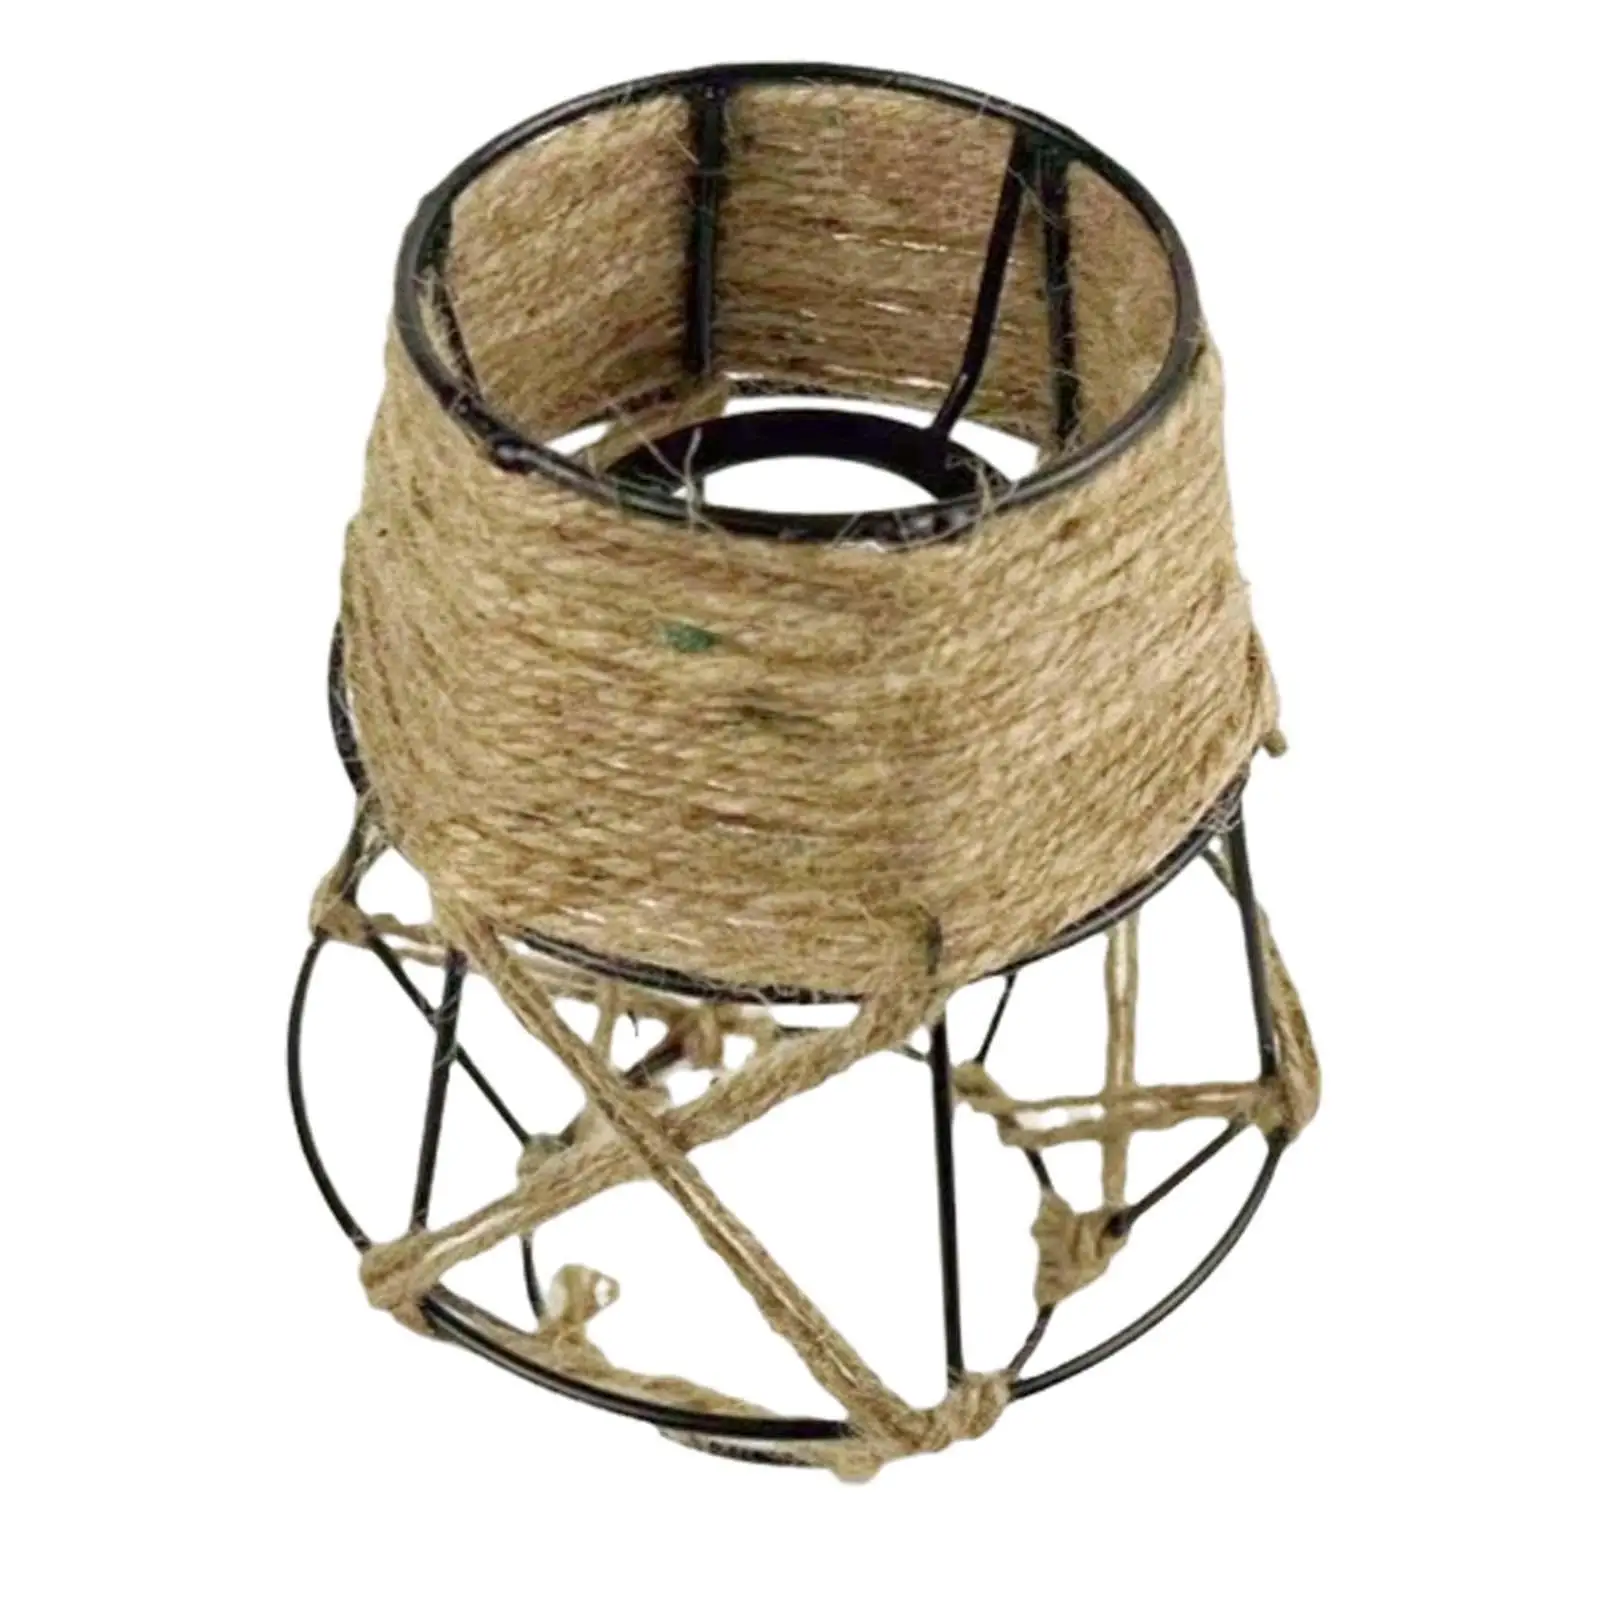 Woven Rope Lampshade Home Ceiling Light Fixture Cover Pendant Lamp Shade for Droplight Dining Room Bars Restaurant Reading Light